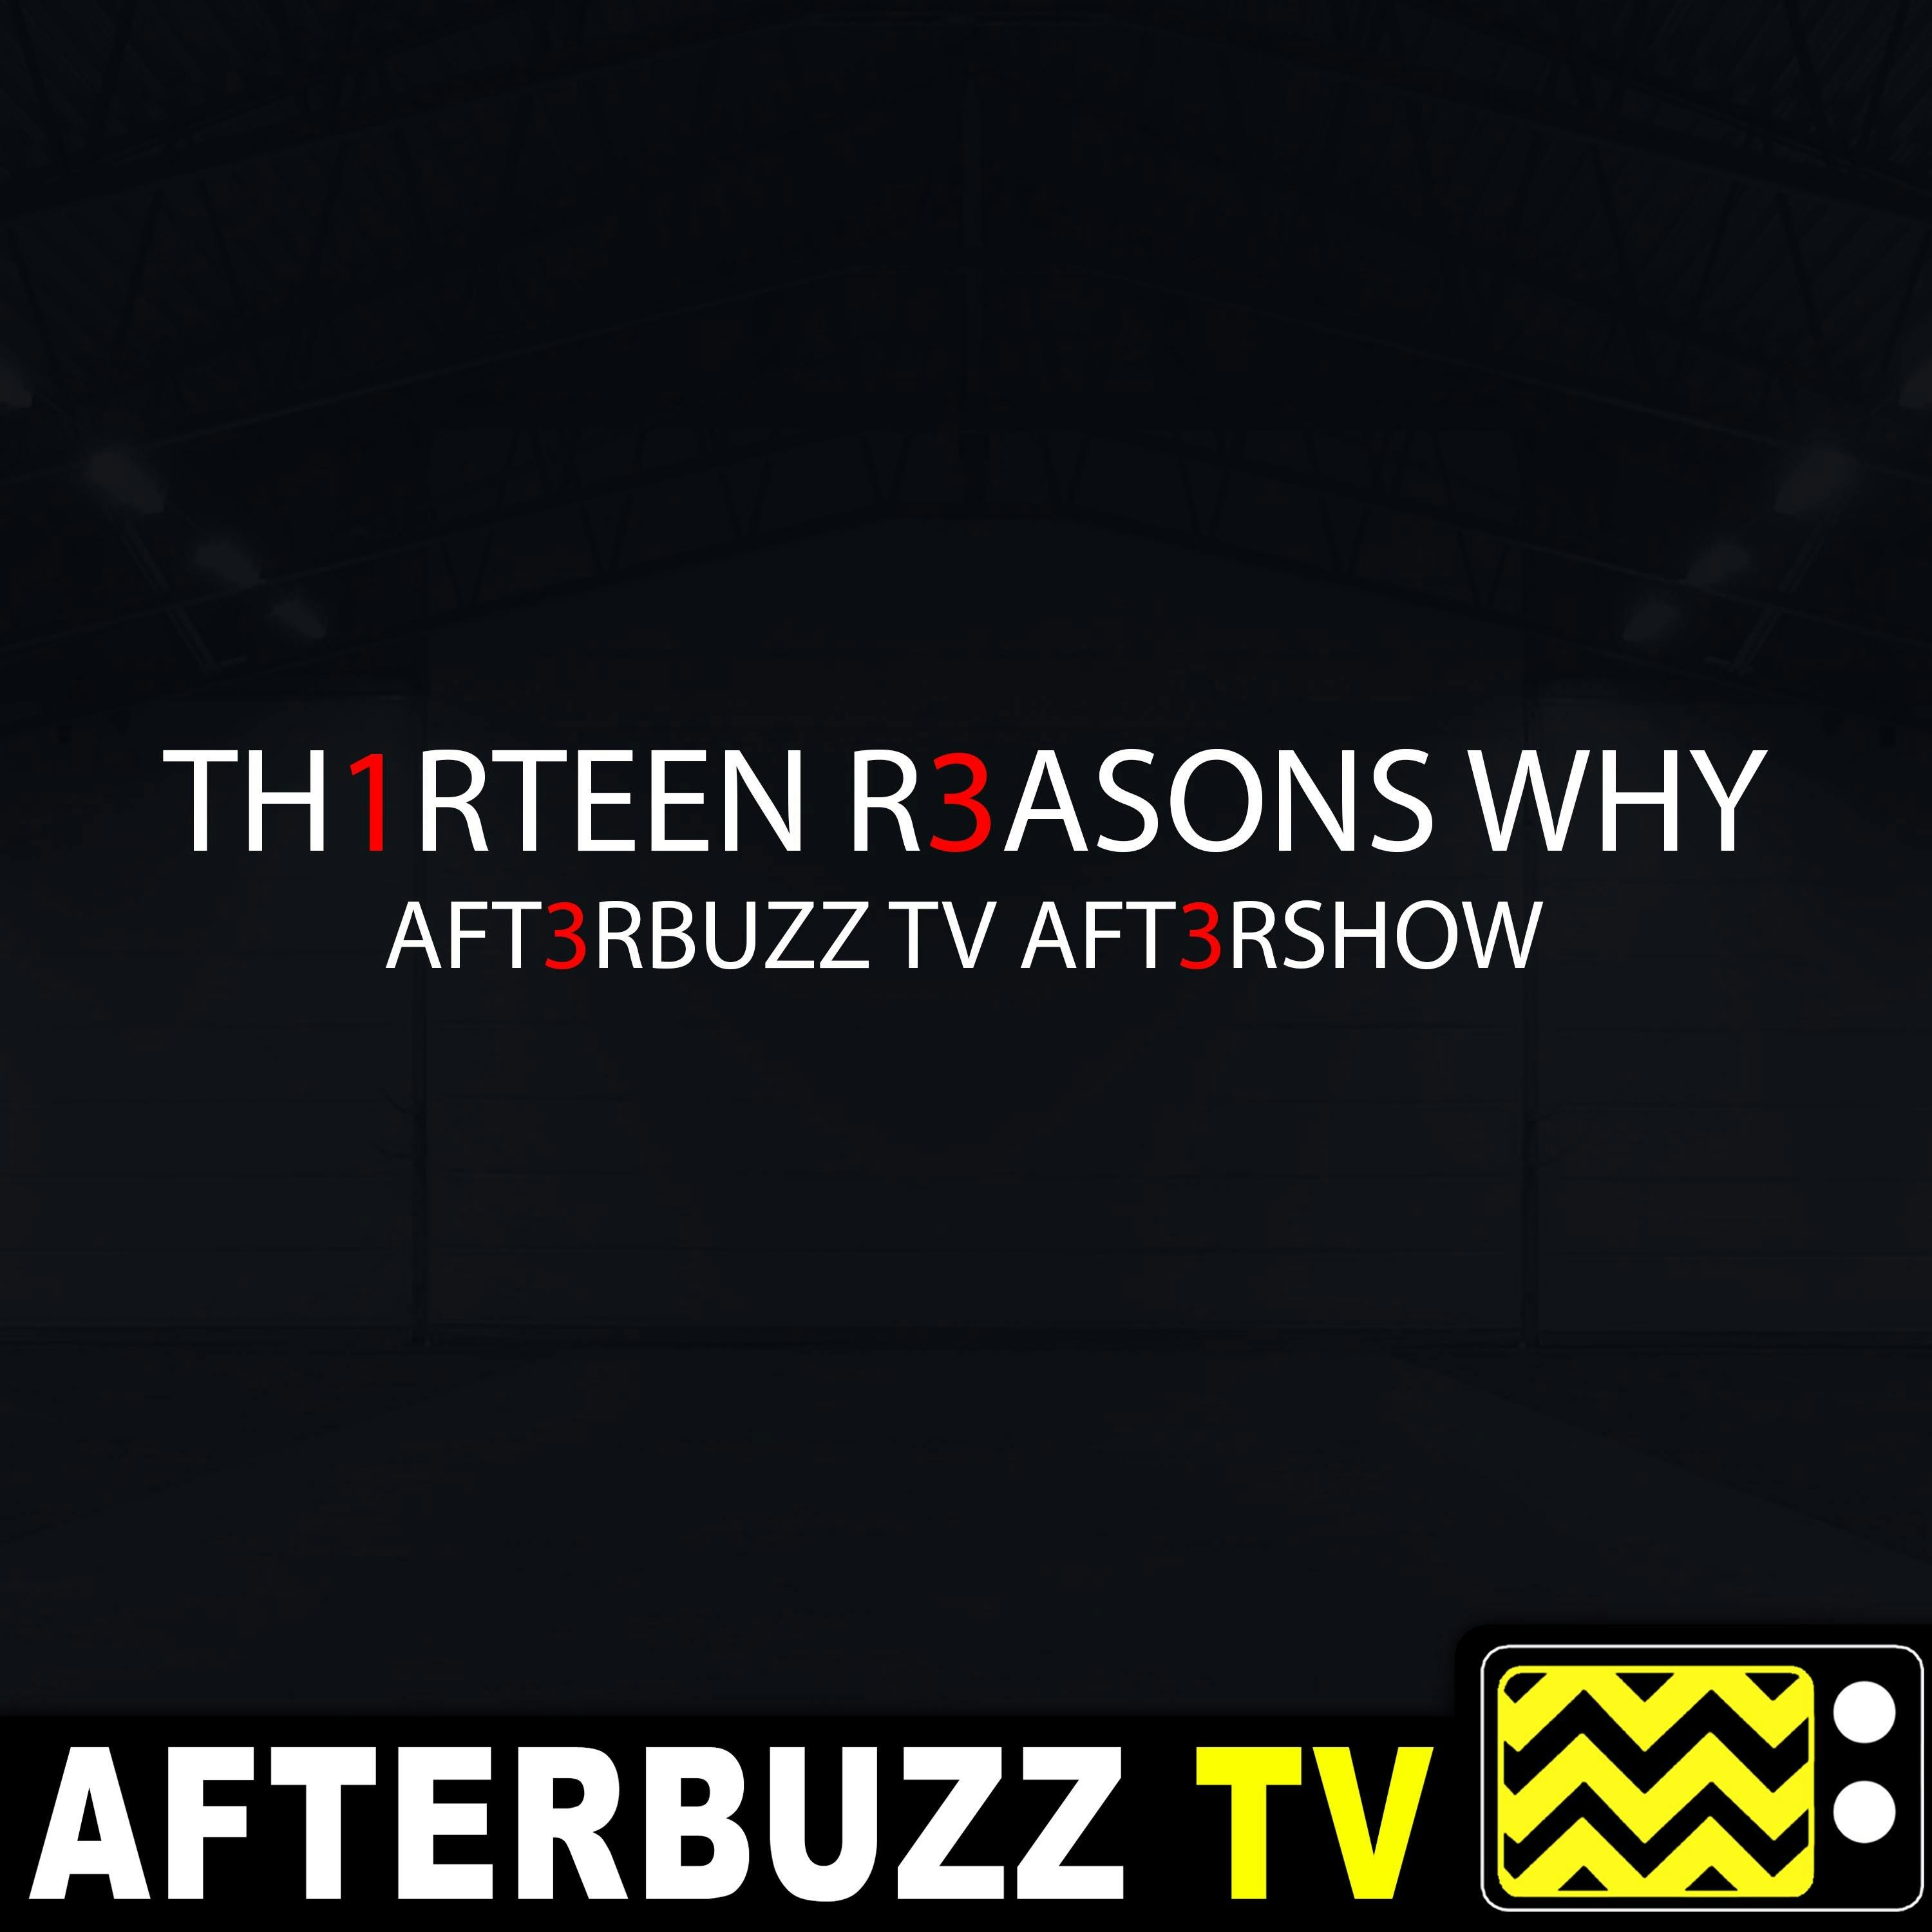 13 Reasons Why S:1 | Mandy Teefey & Kristel Laiblin Guest on Tape 2 Side B; Tape 3 Side A E:4 & E:5 | AfterBuzz TV AfterShow